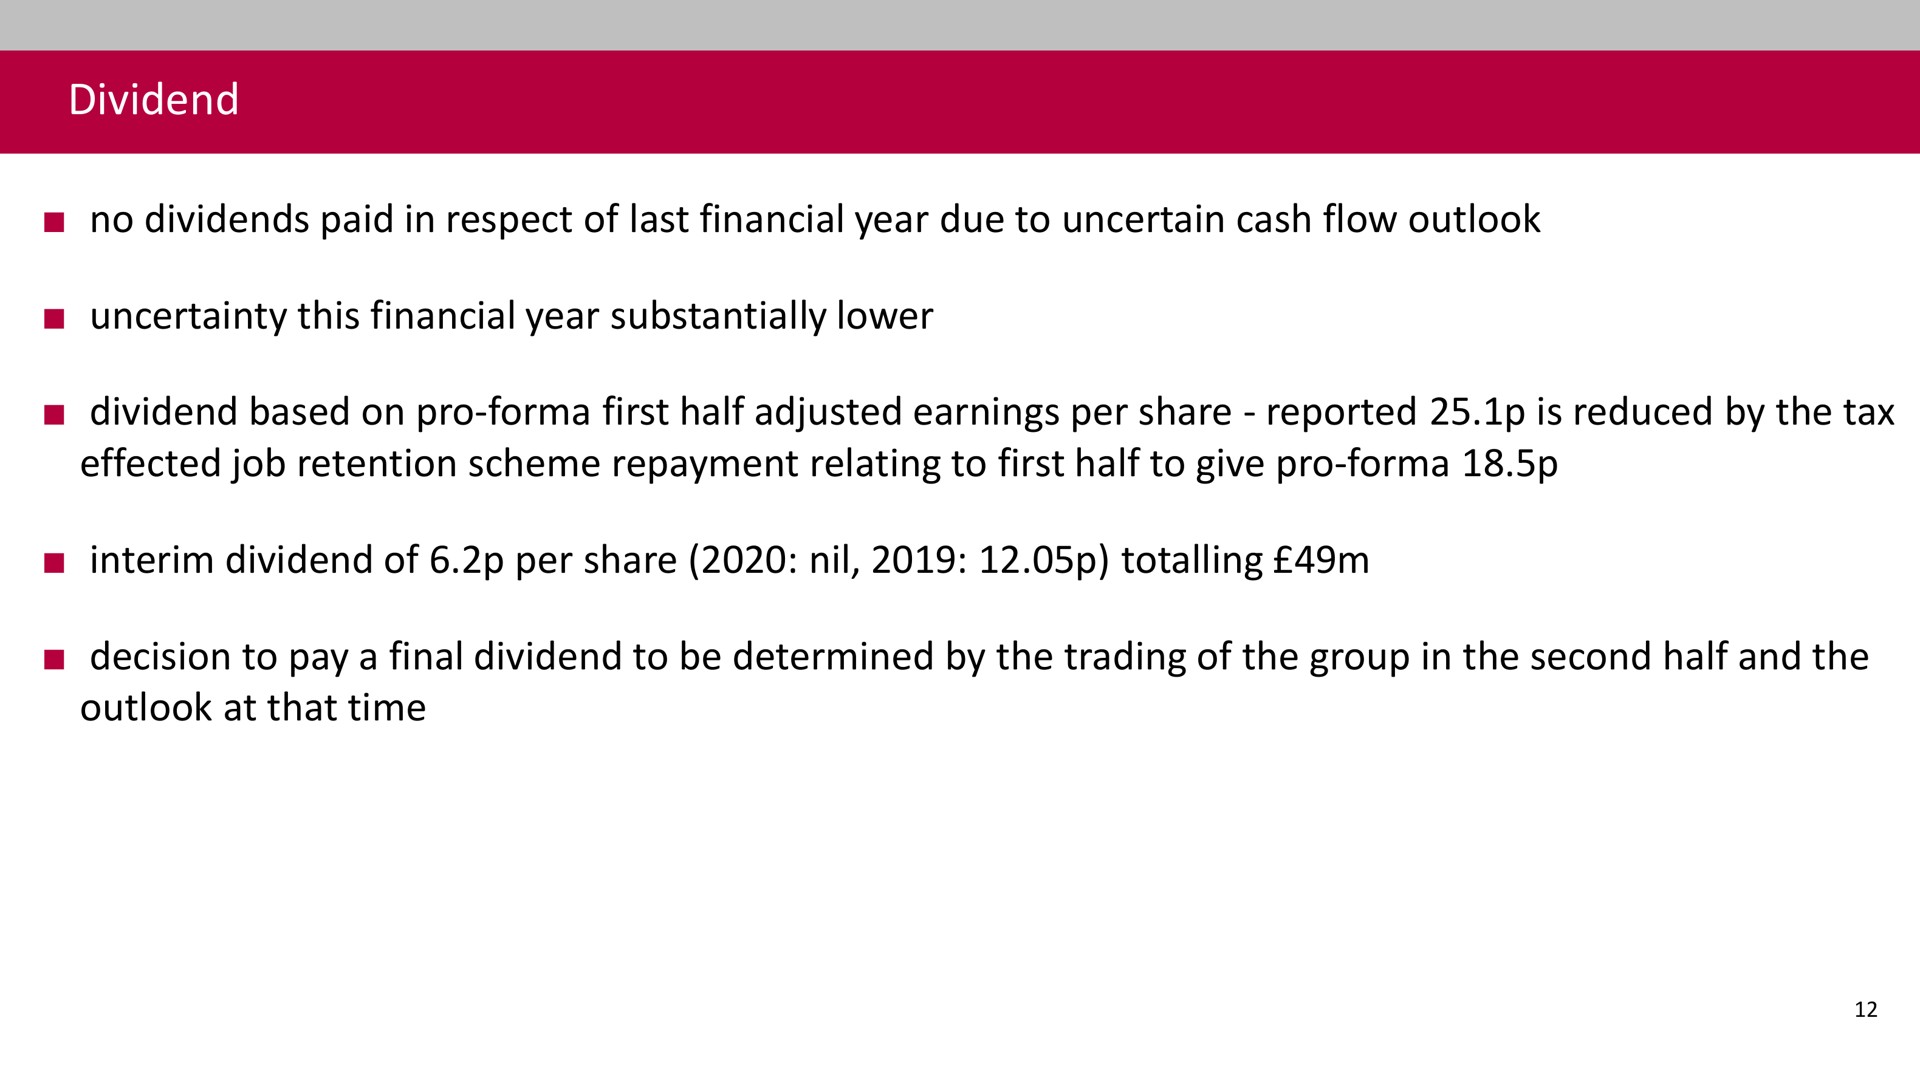 dividend no dividends paid in respect of last financial year due to uncertain cash flow outlook uncertainty this financial year substantially lower dividend based on pro first half adjusted earnings per share reported is reduced by the tax effected job retention scheme repayment relating to first half to give pro interim dividend of per share nil totalling decision to pay a final dividend to be determined by the trading of the group in the second half and the outlook at that time | Associated British Foods